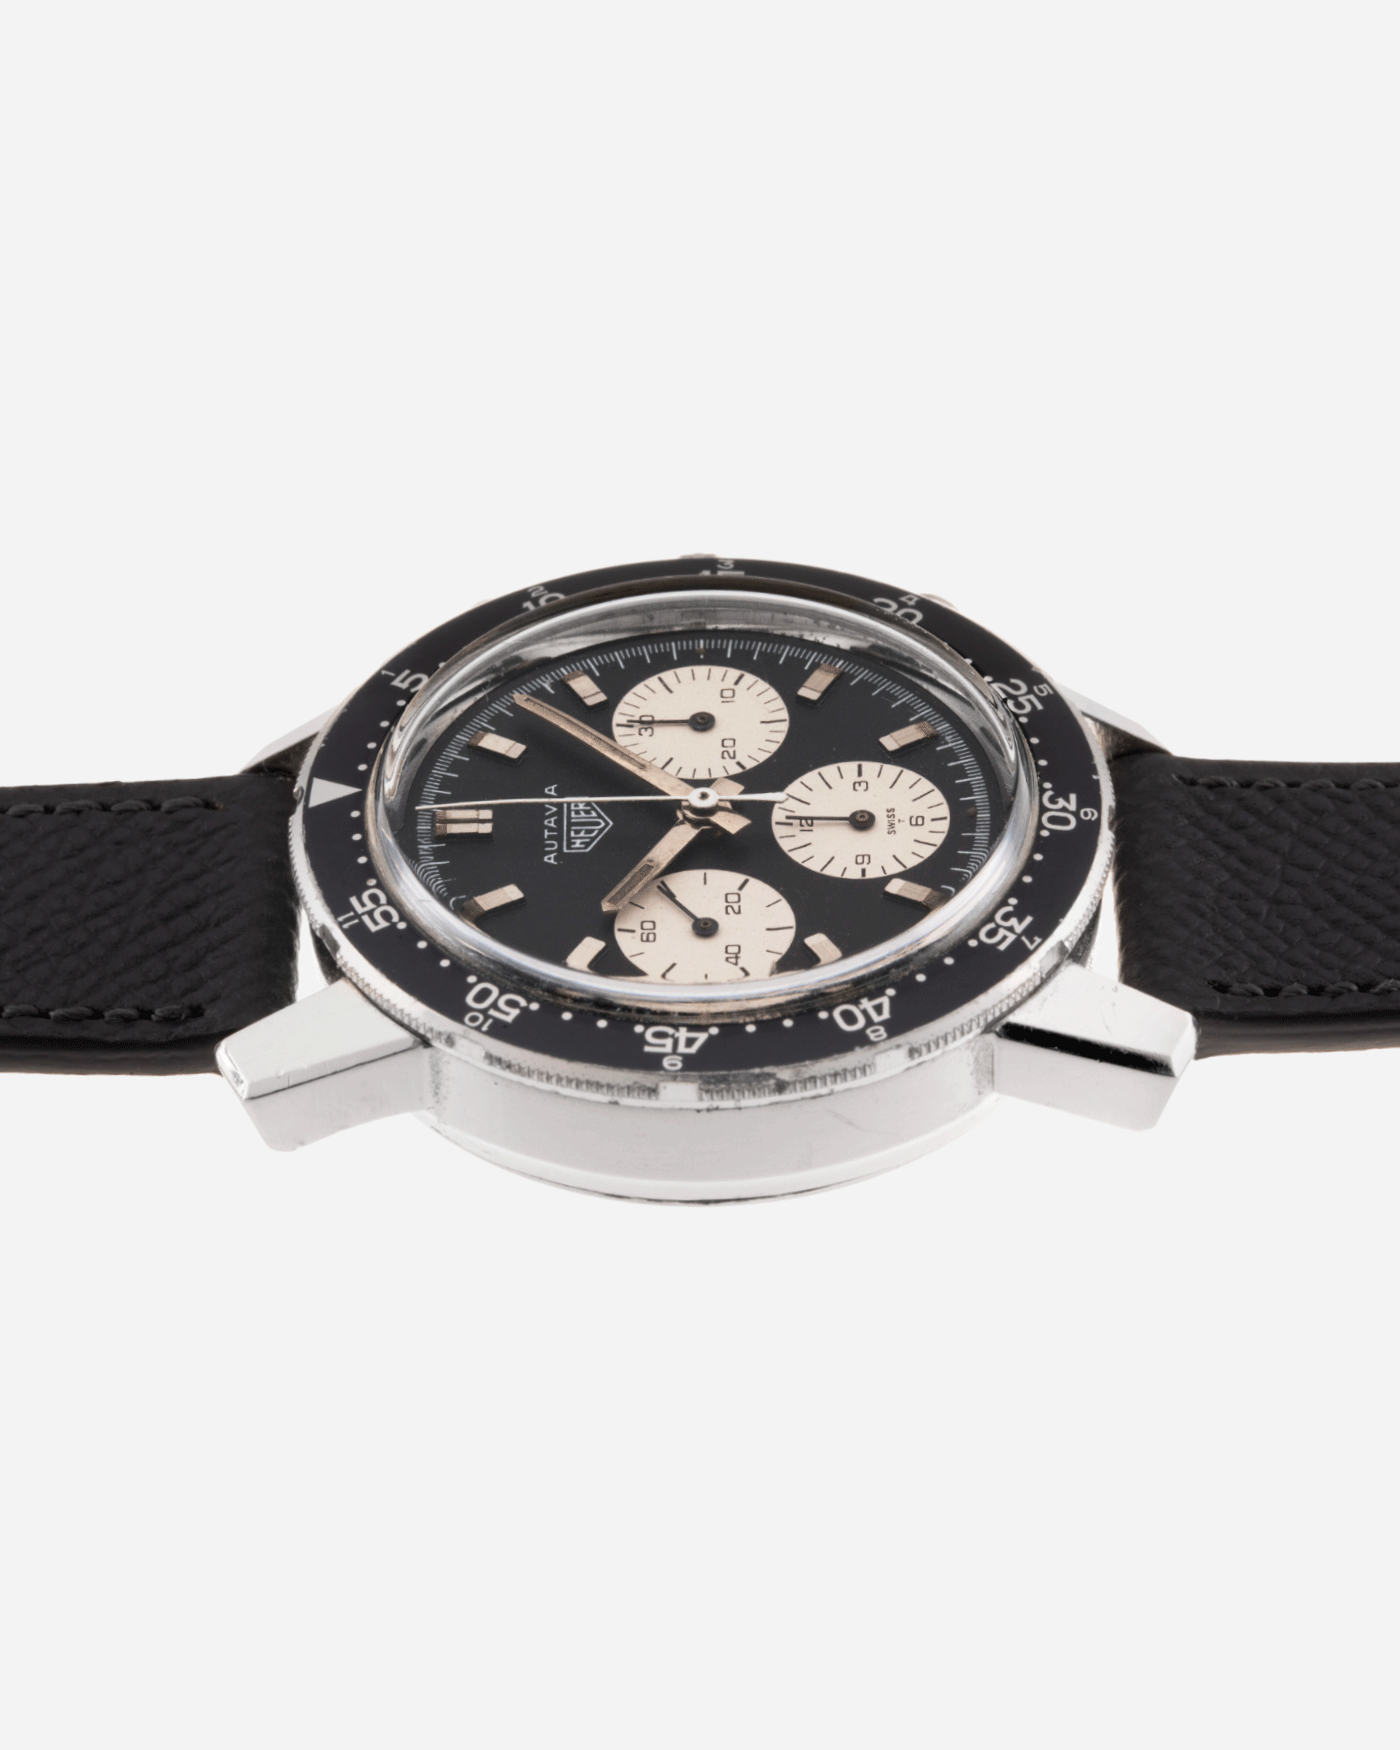 Brand: Heuer Year: 1960’s Model: Autavia Reference Number: 2446C MH (Compressor Case, Minute Hour Bezel) Serial Number: 110XXX Material: Stainless Steel Movement: Valjoux 72 Case Diameter: 40mm Lug Width: 20mm Bracelet/Strap: Molequin Anthracite Grey Textured Calf and Stainless Steel Buckle